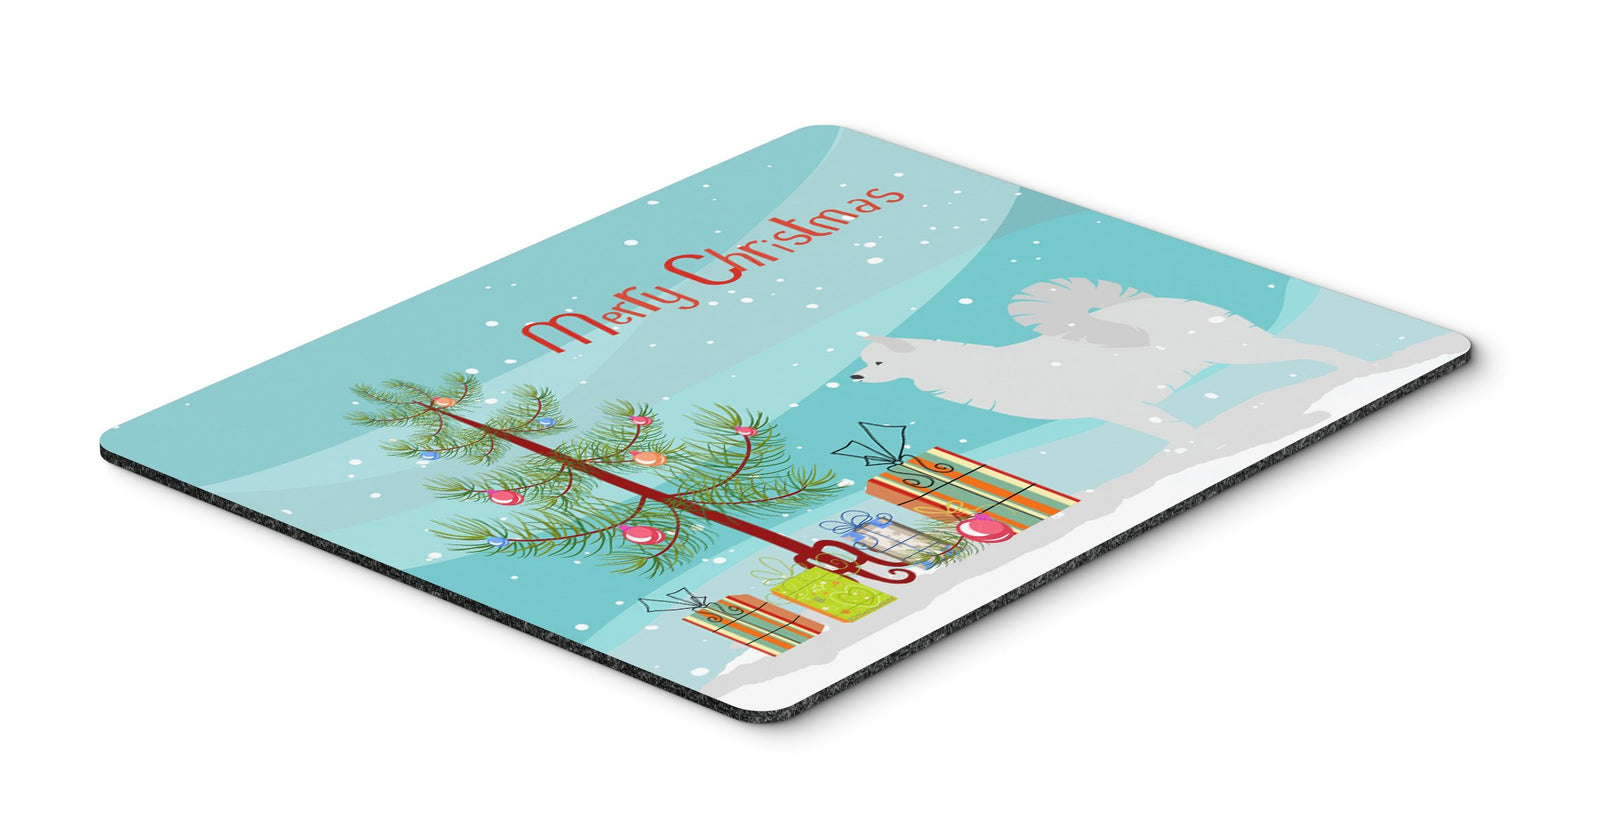 Samoyed Merry Christmas Tree Mouse Pad, Hot Pad or Trivet BB2977MP by Caroline's Treasures